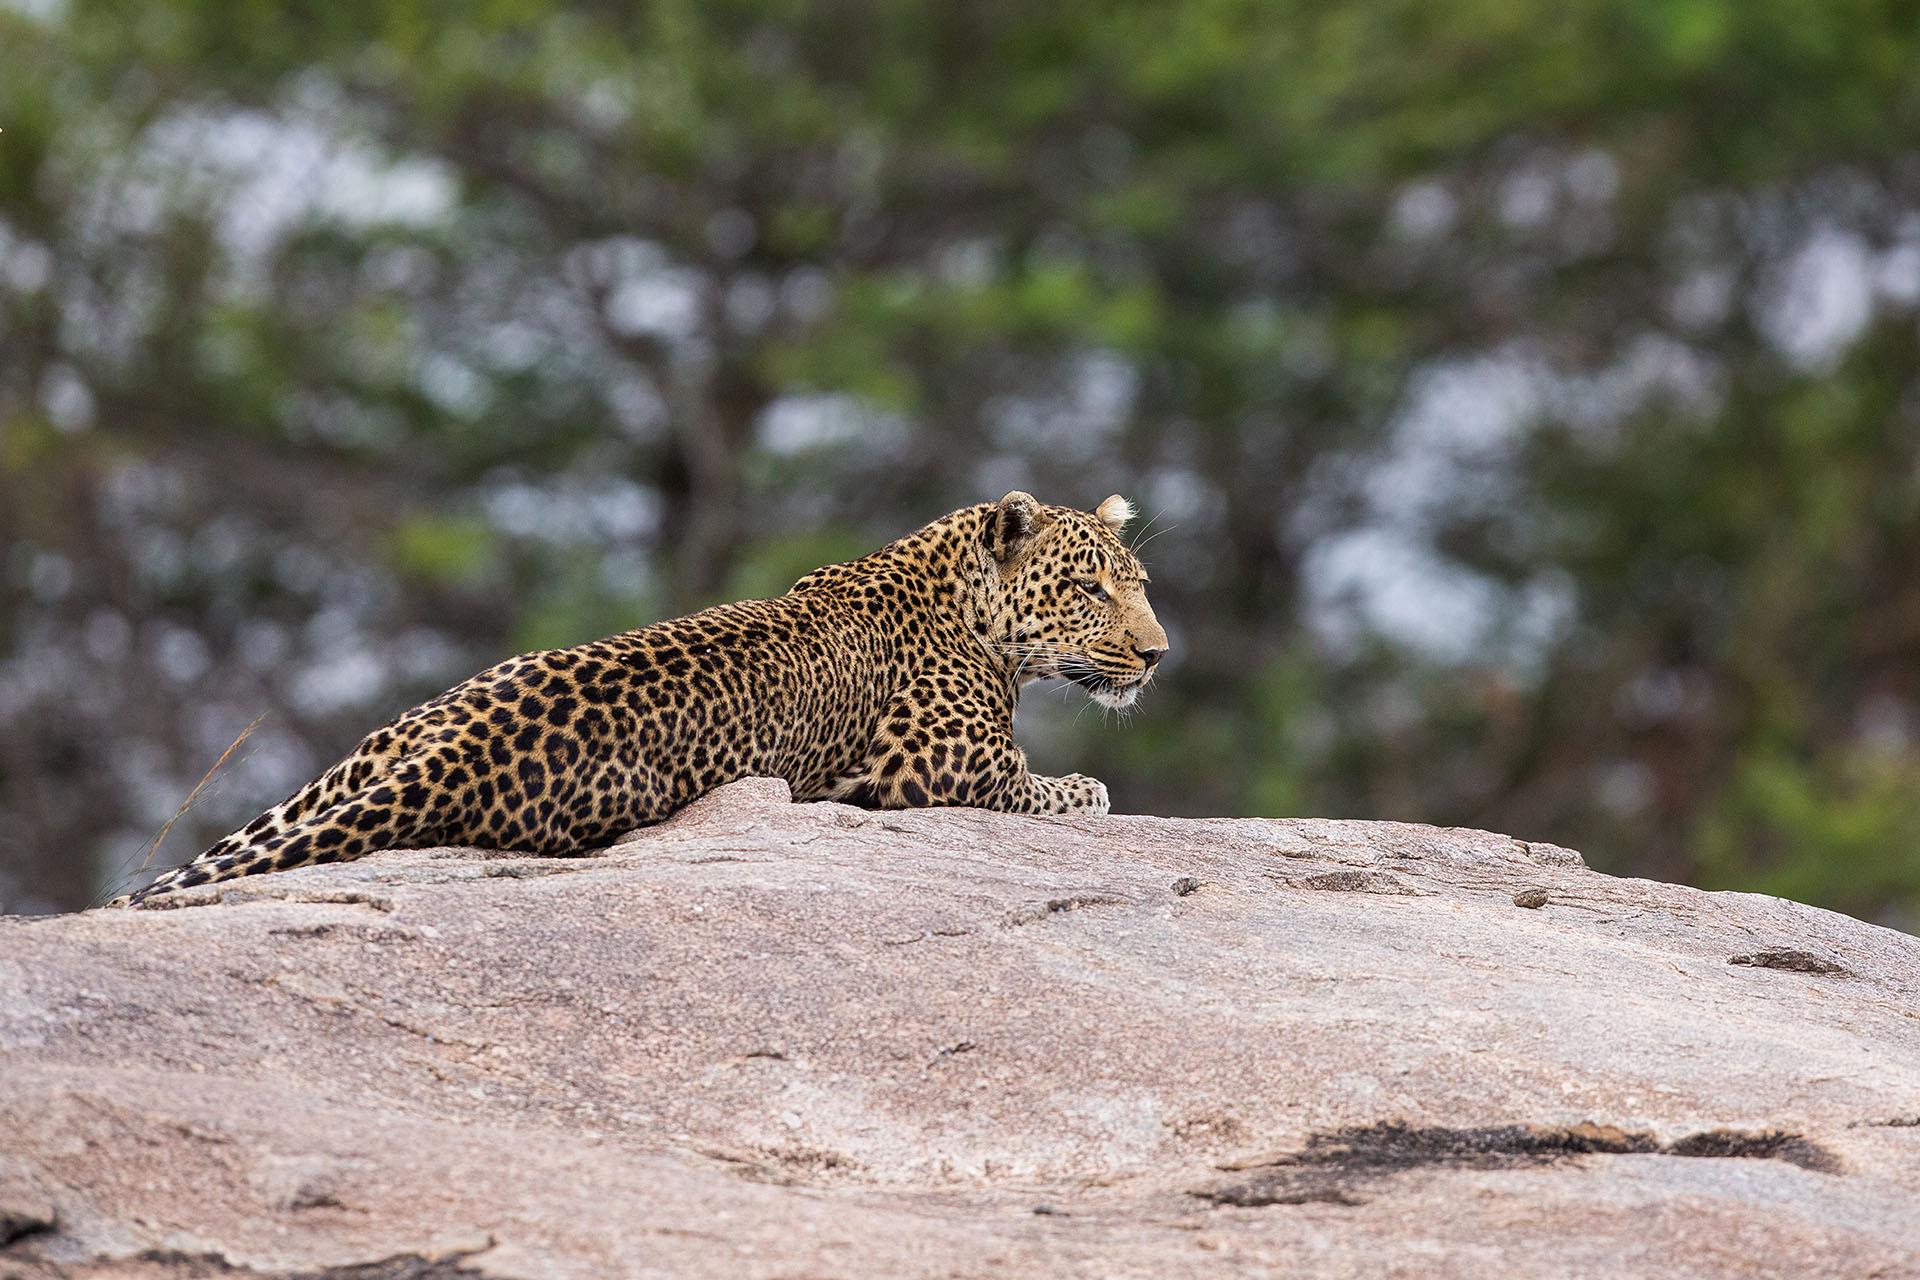 It is listed as Vulnerable on the IUCN Red List because leopard populations are threatened by habitat loss and fragmentation, and are declining in large parts of the global range